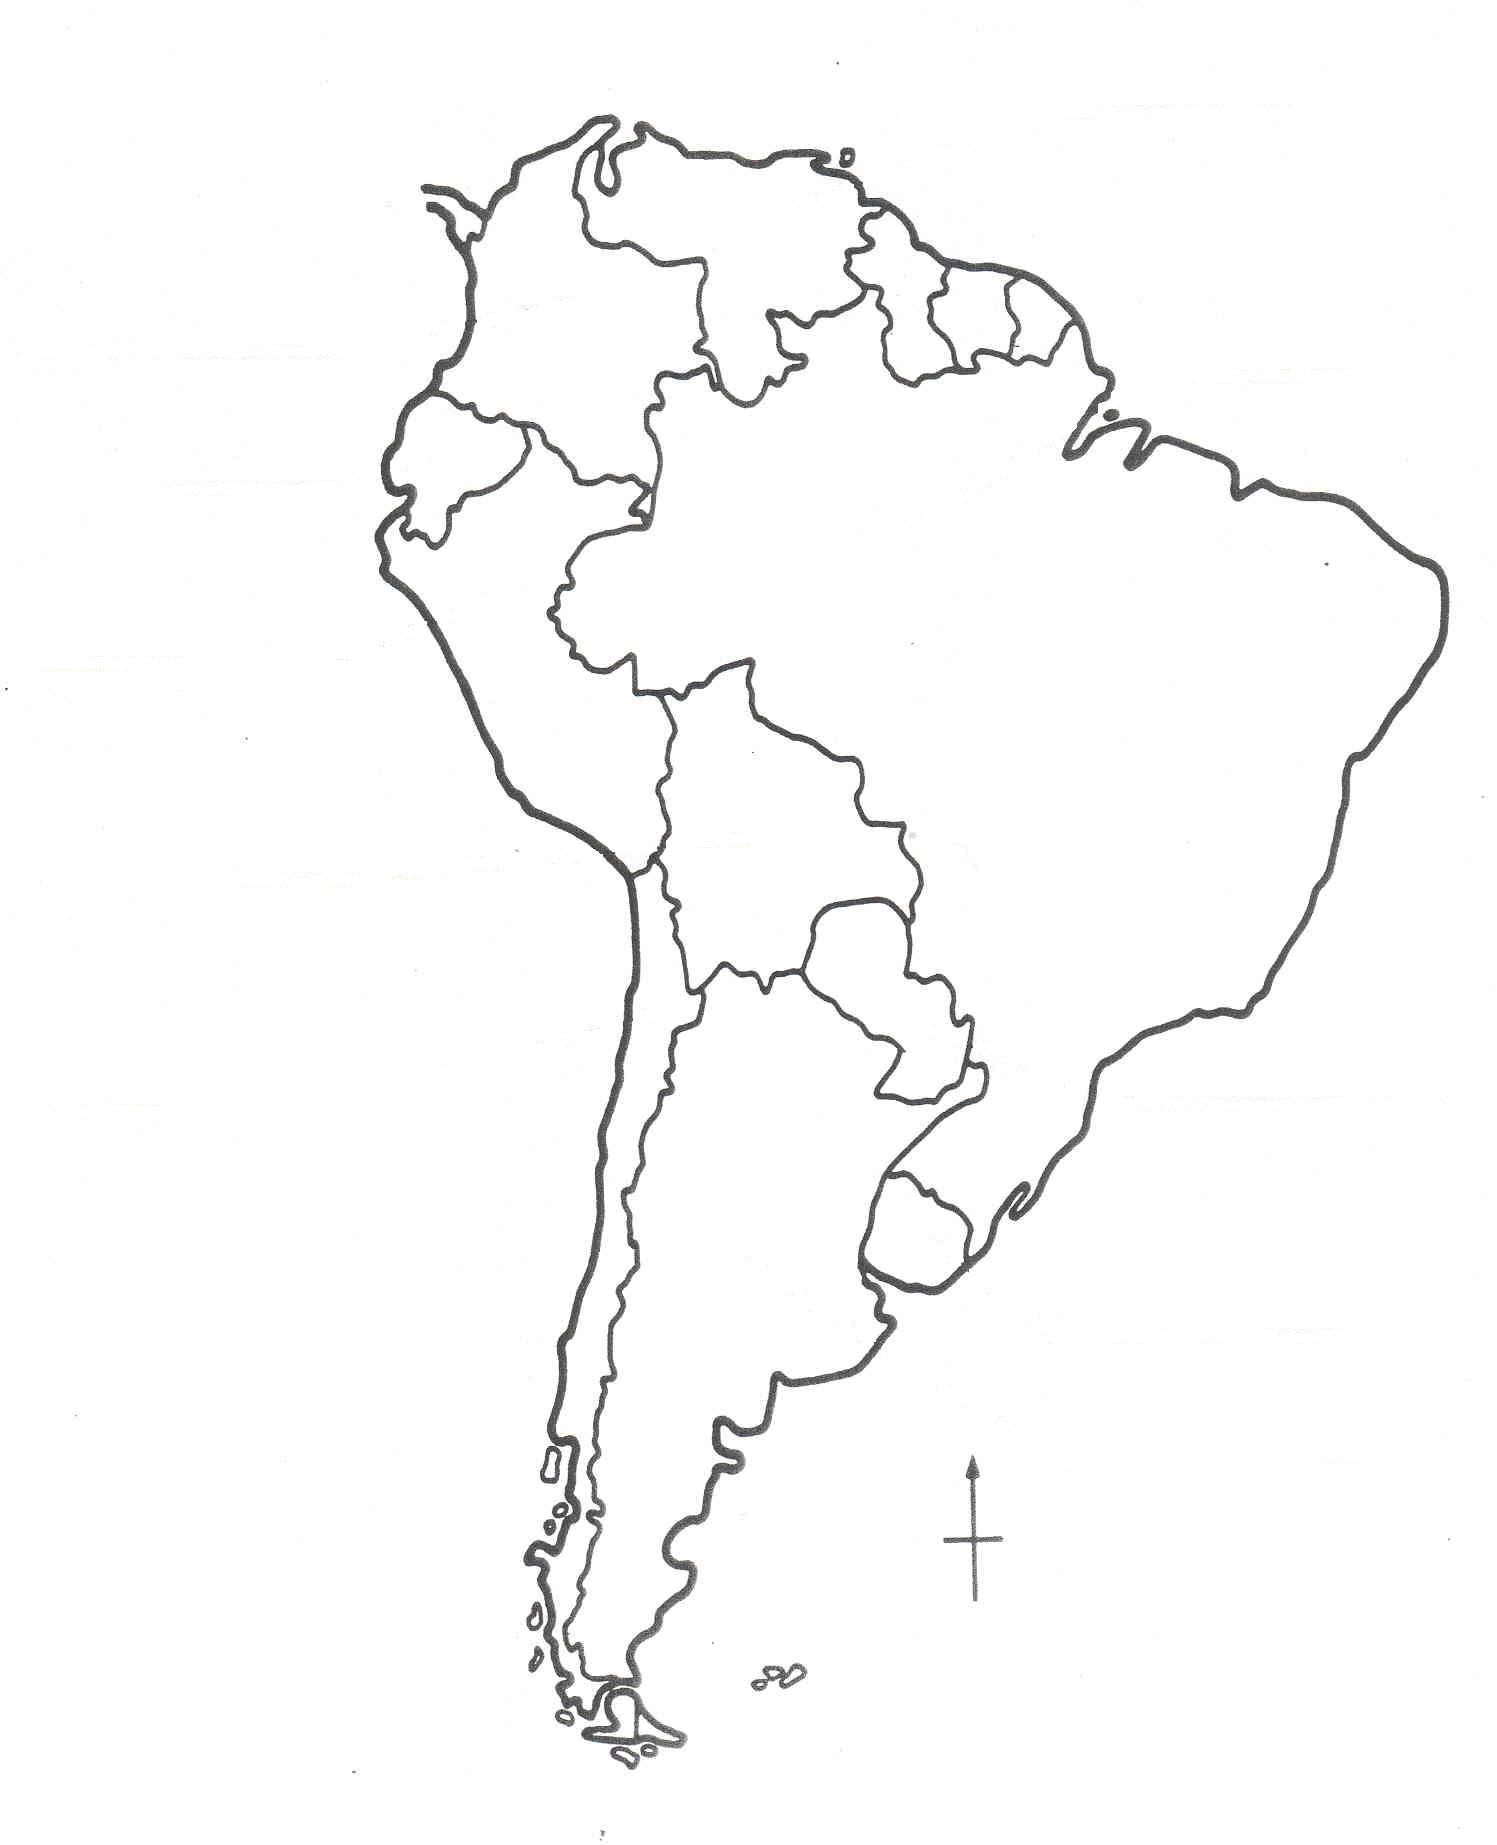 blank south america map high quality - Google Search | South ...